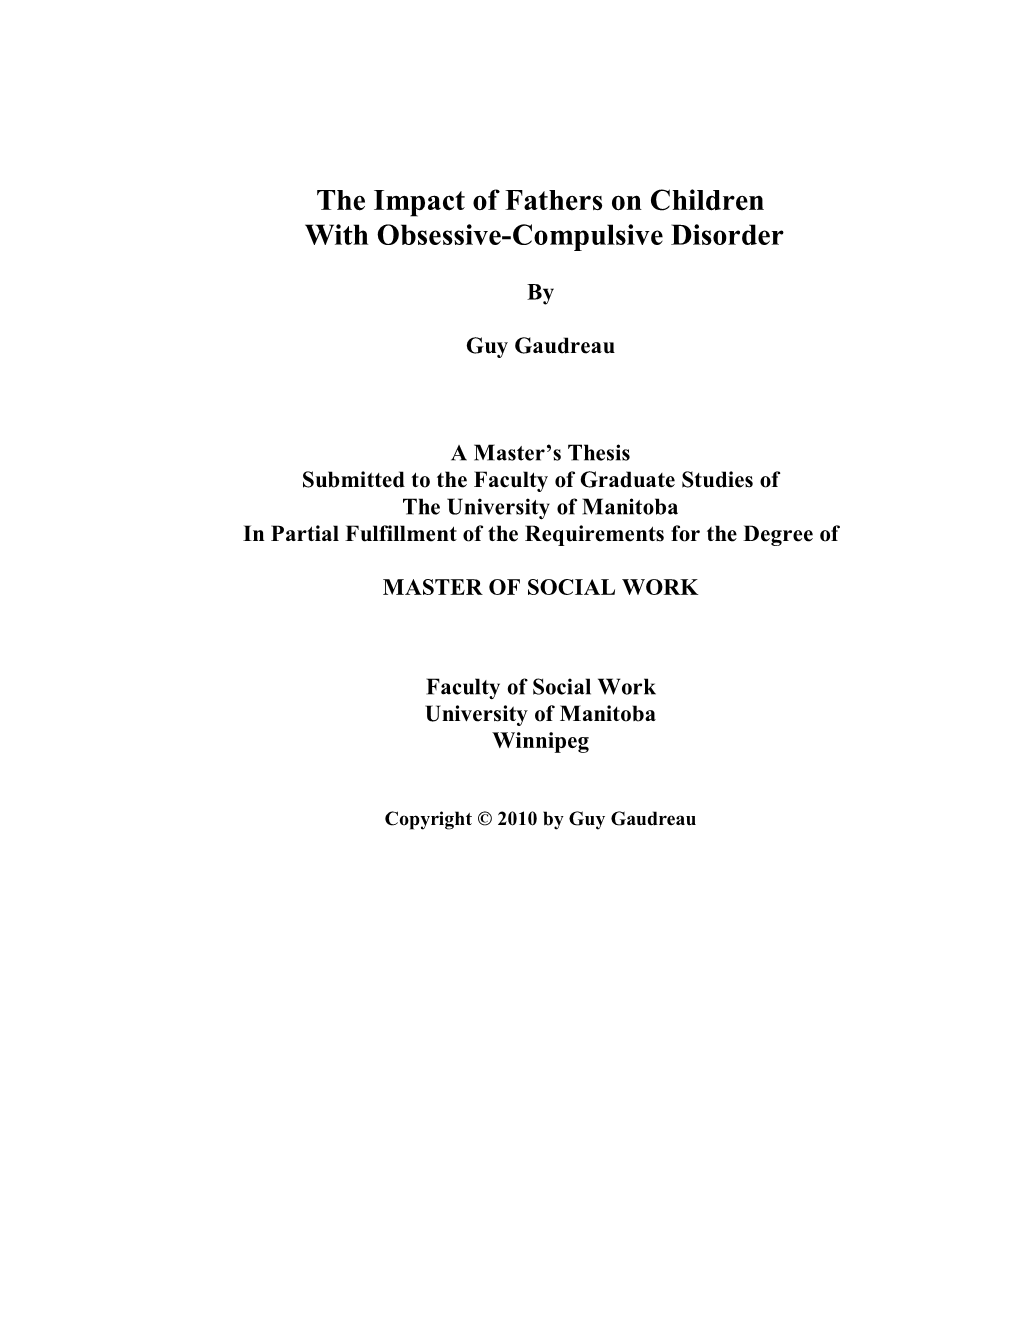 The Impact of Fathers on Children with Obsessive-Compulsive Disorder